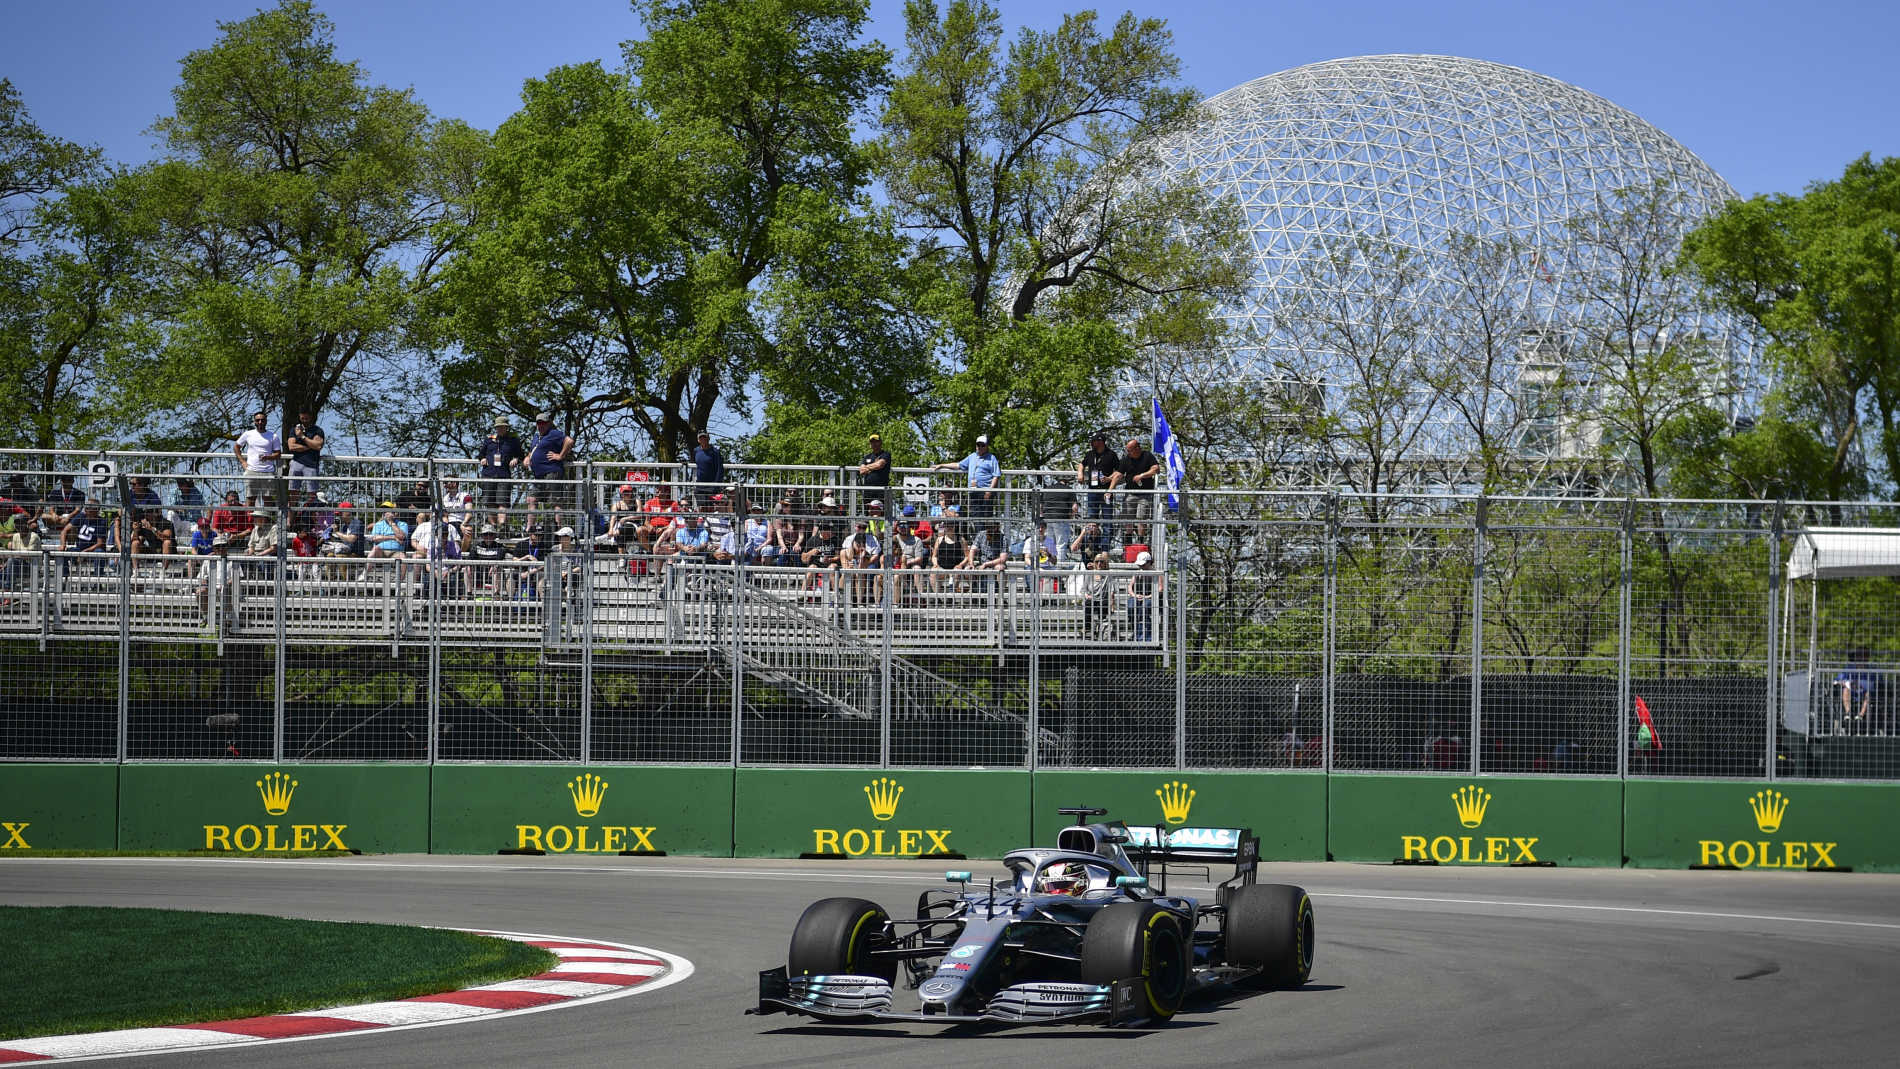 Canadian Grand Prix 2019 Free Practice 1 report and highlights